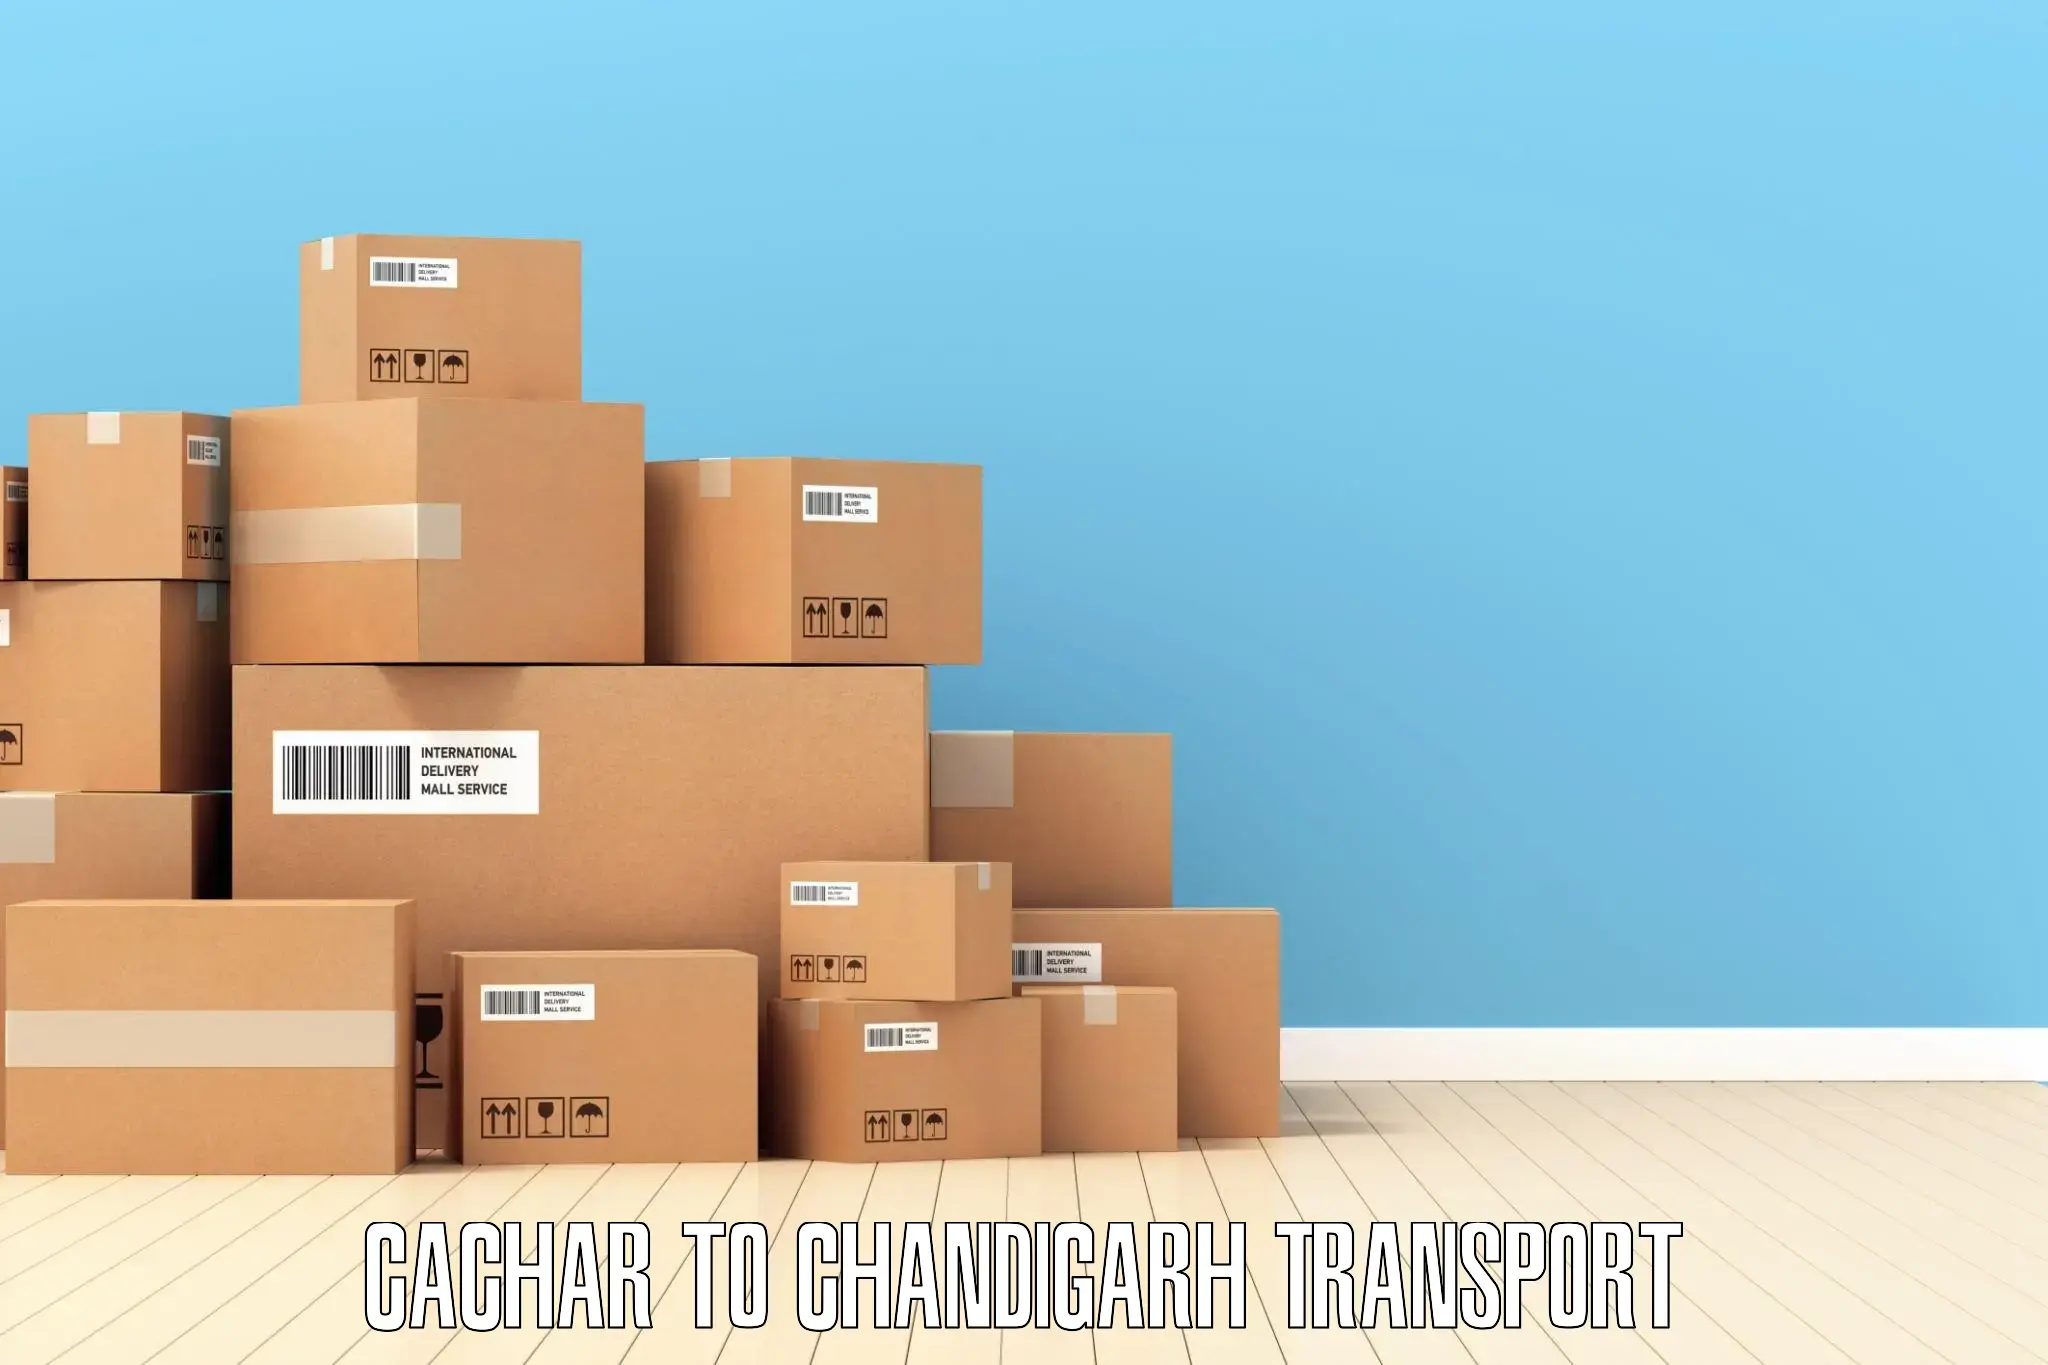 Express transport services Cachar to Chandigarh